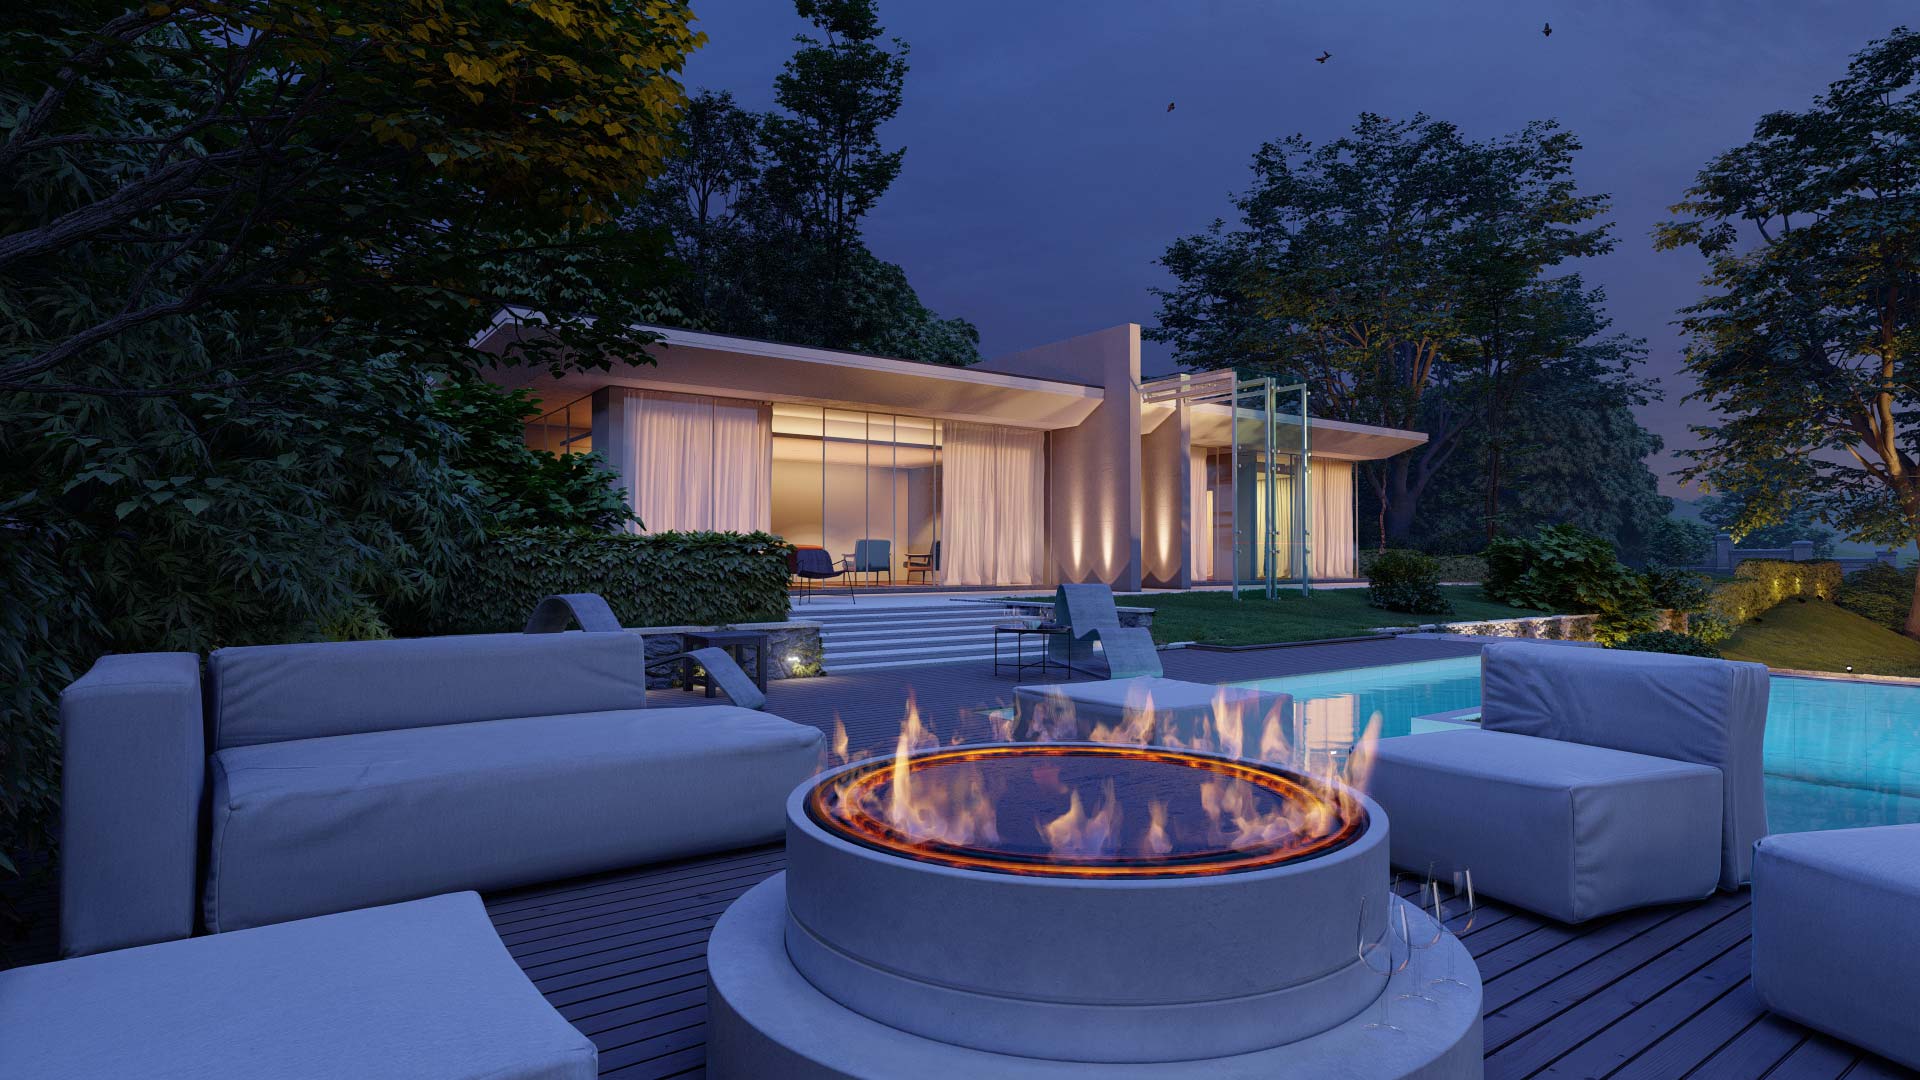 Residential house with outdoor fire pit